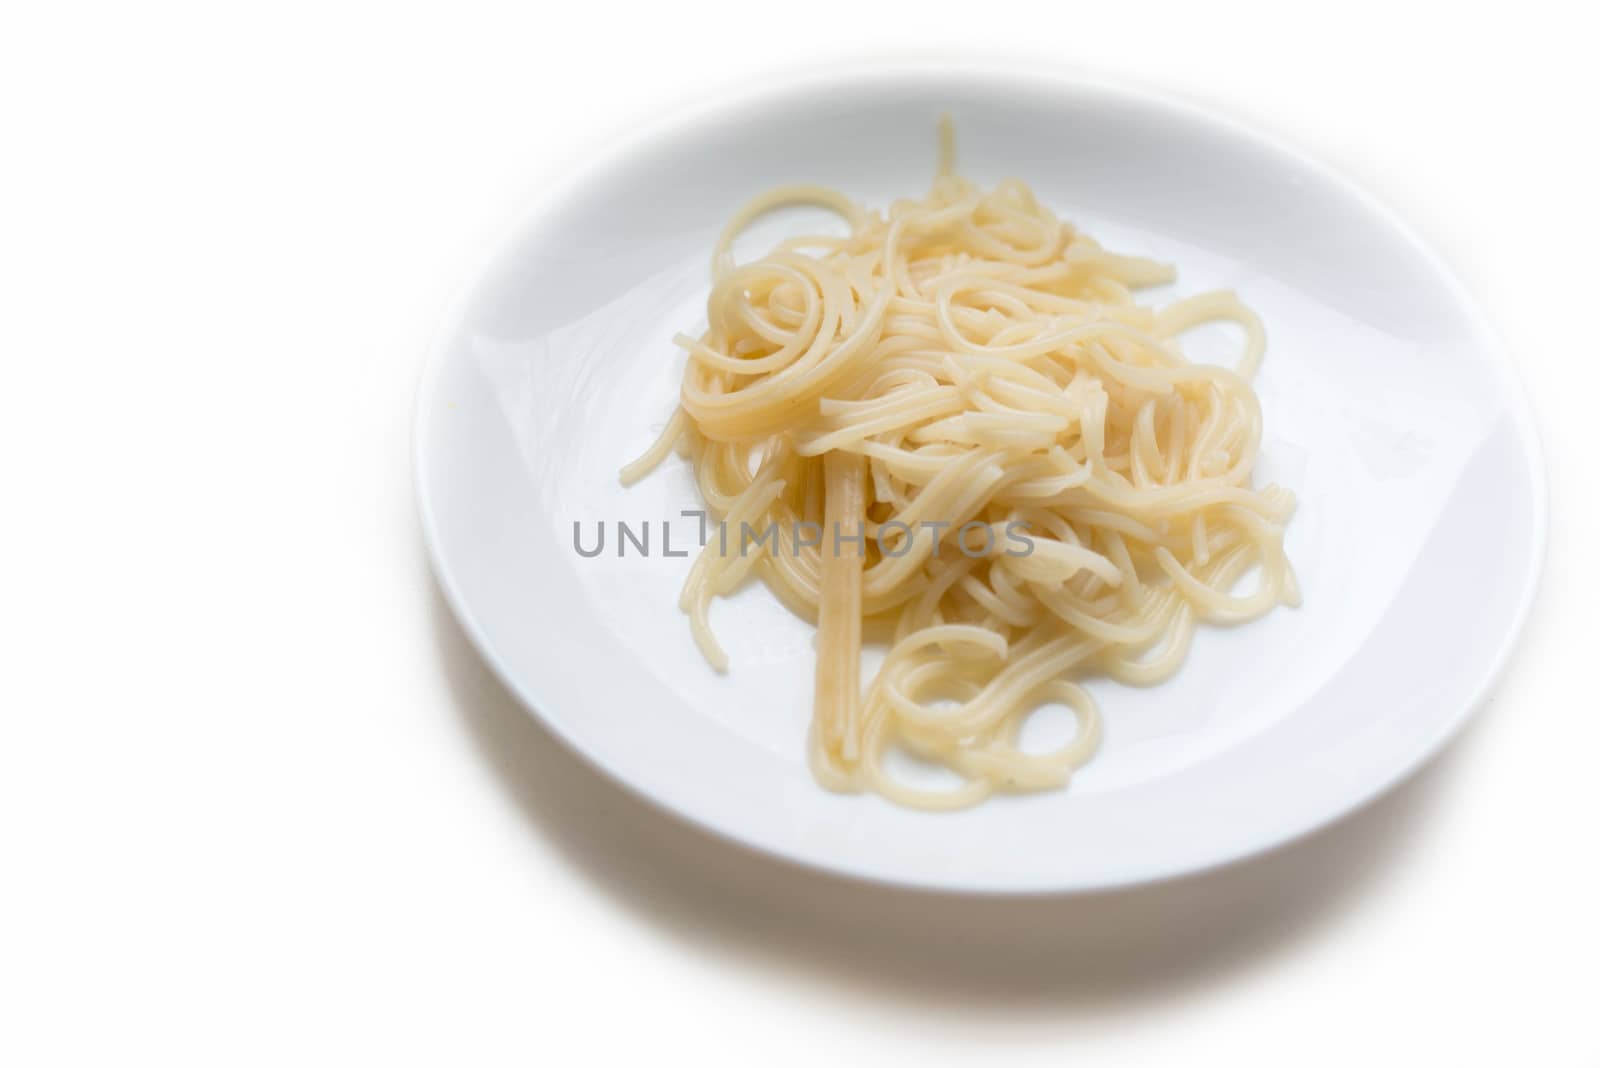 A plate of pasta on a white background